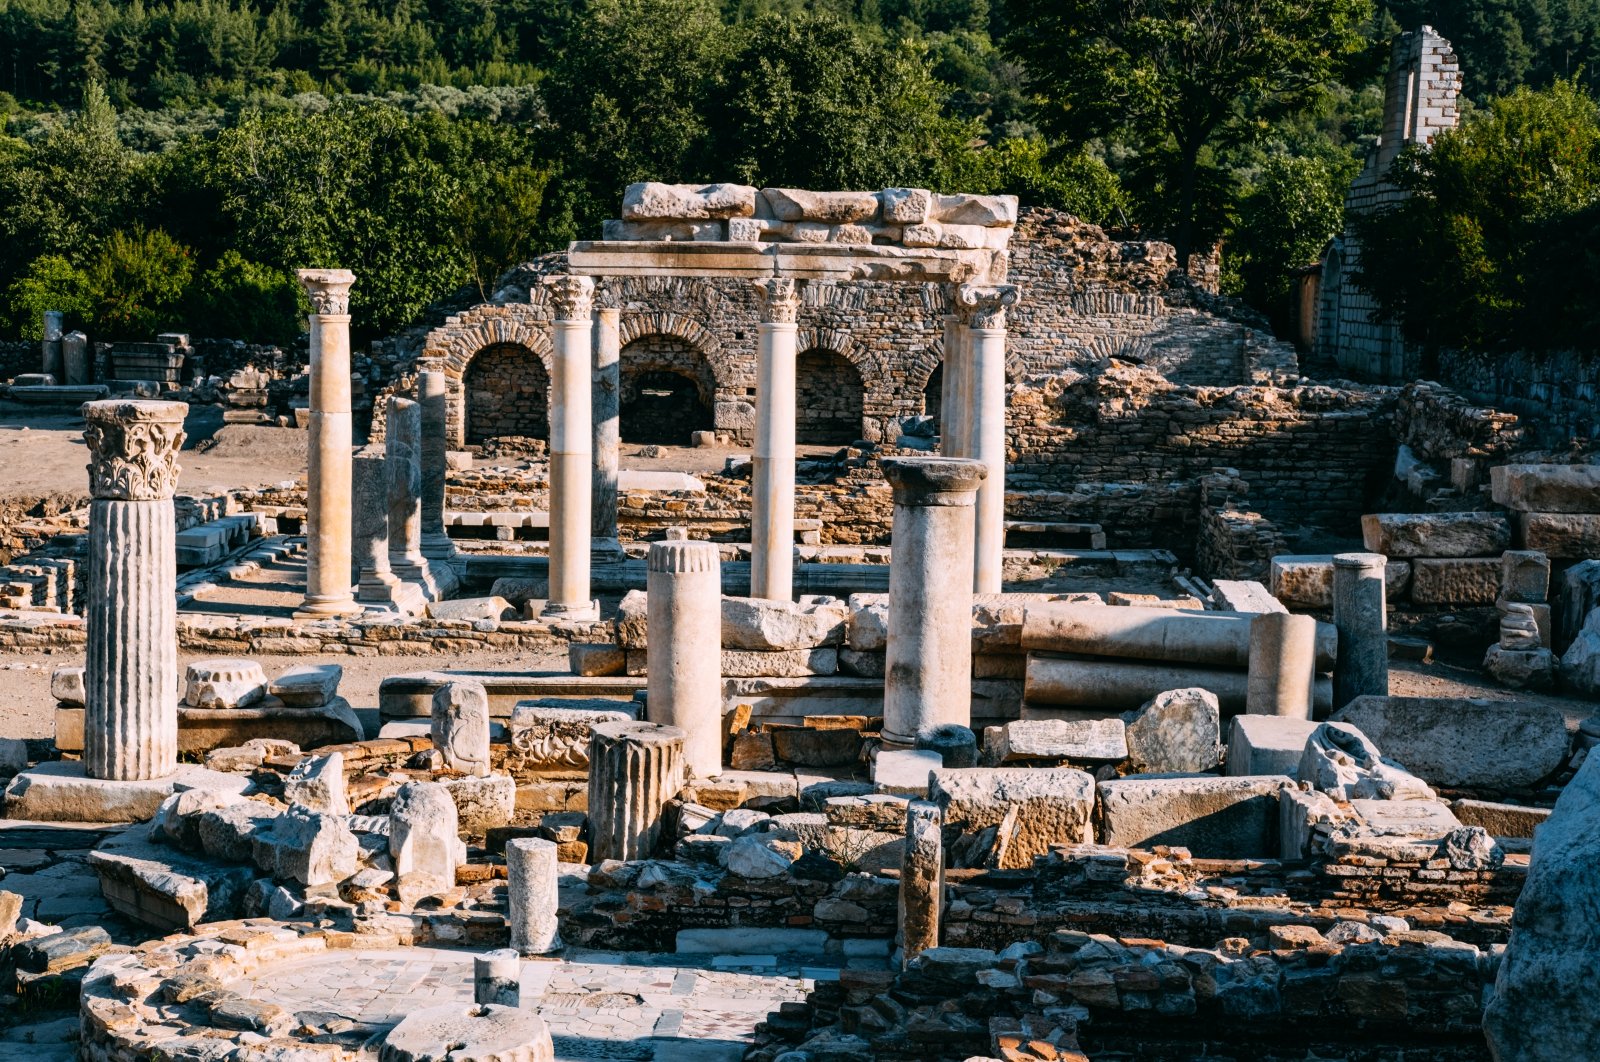 Known as the "City of Eternal Love," Stratonikeia is an ancient Carian city located 30 kilometers (around 20 miles) from Milas, Türkiye. (Shutterstock Photo)